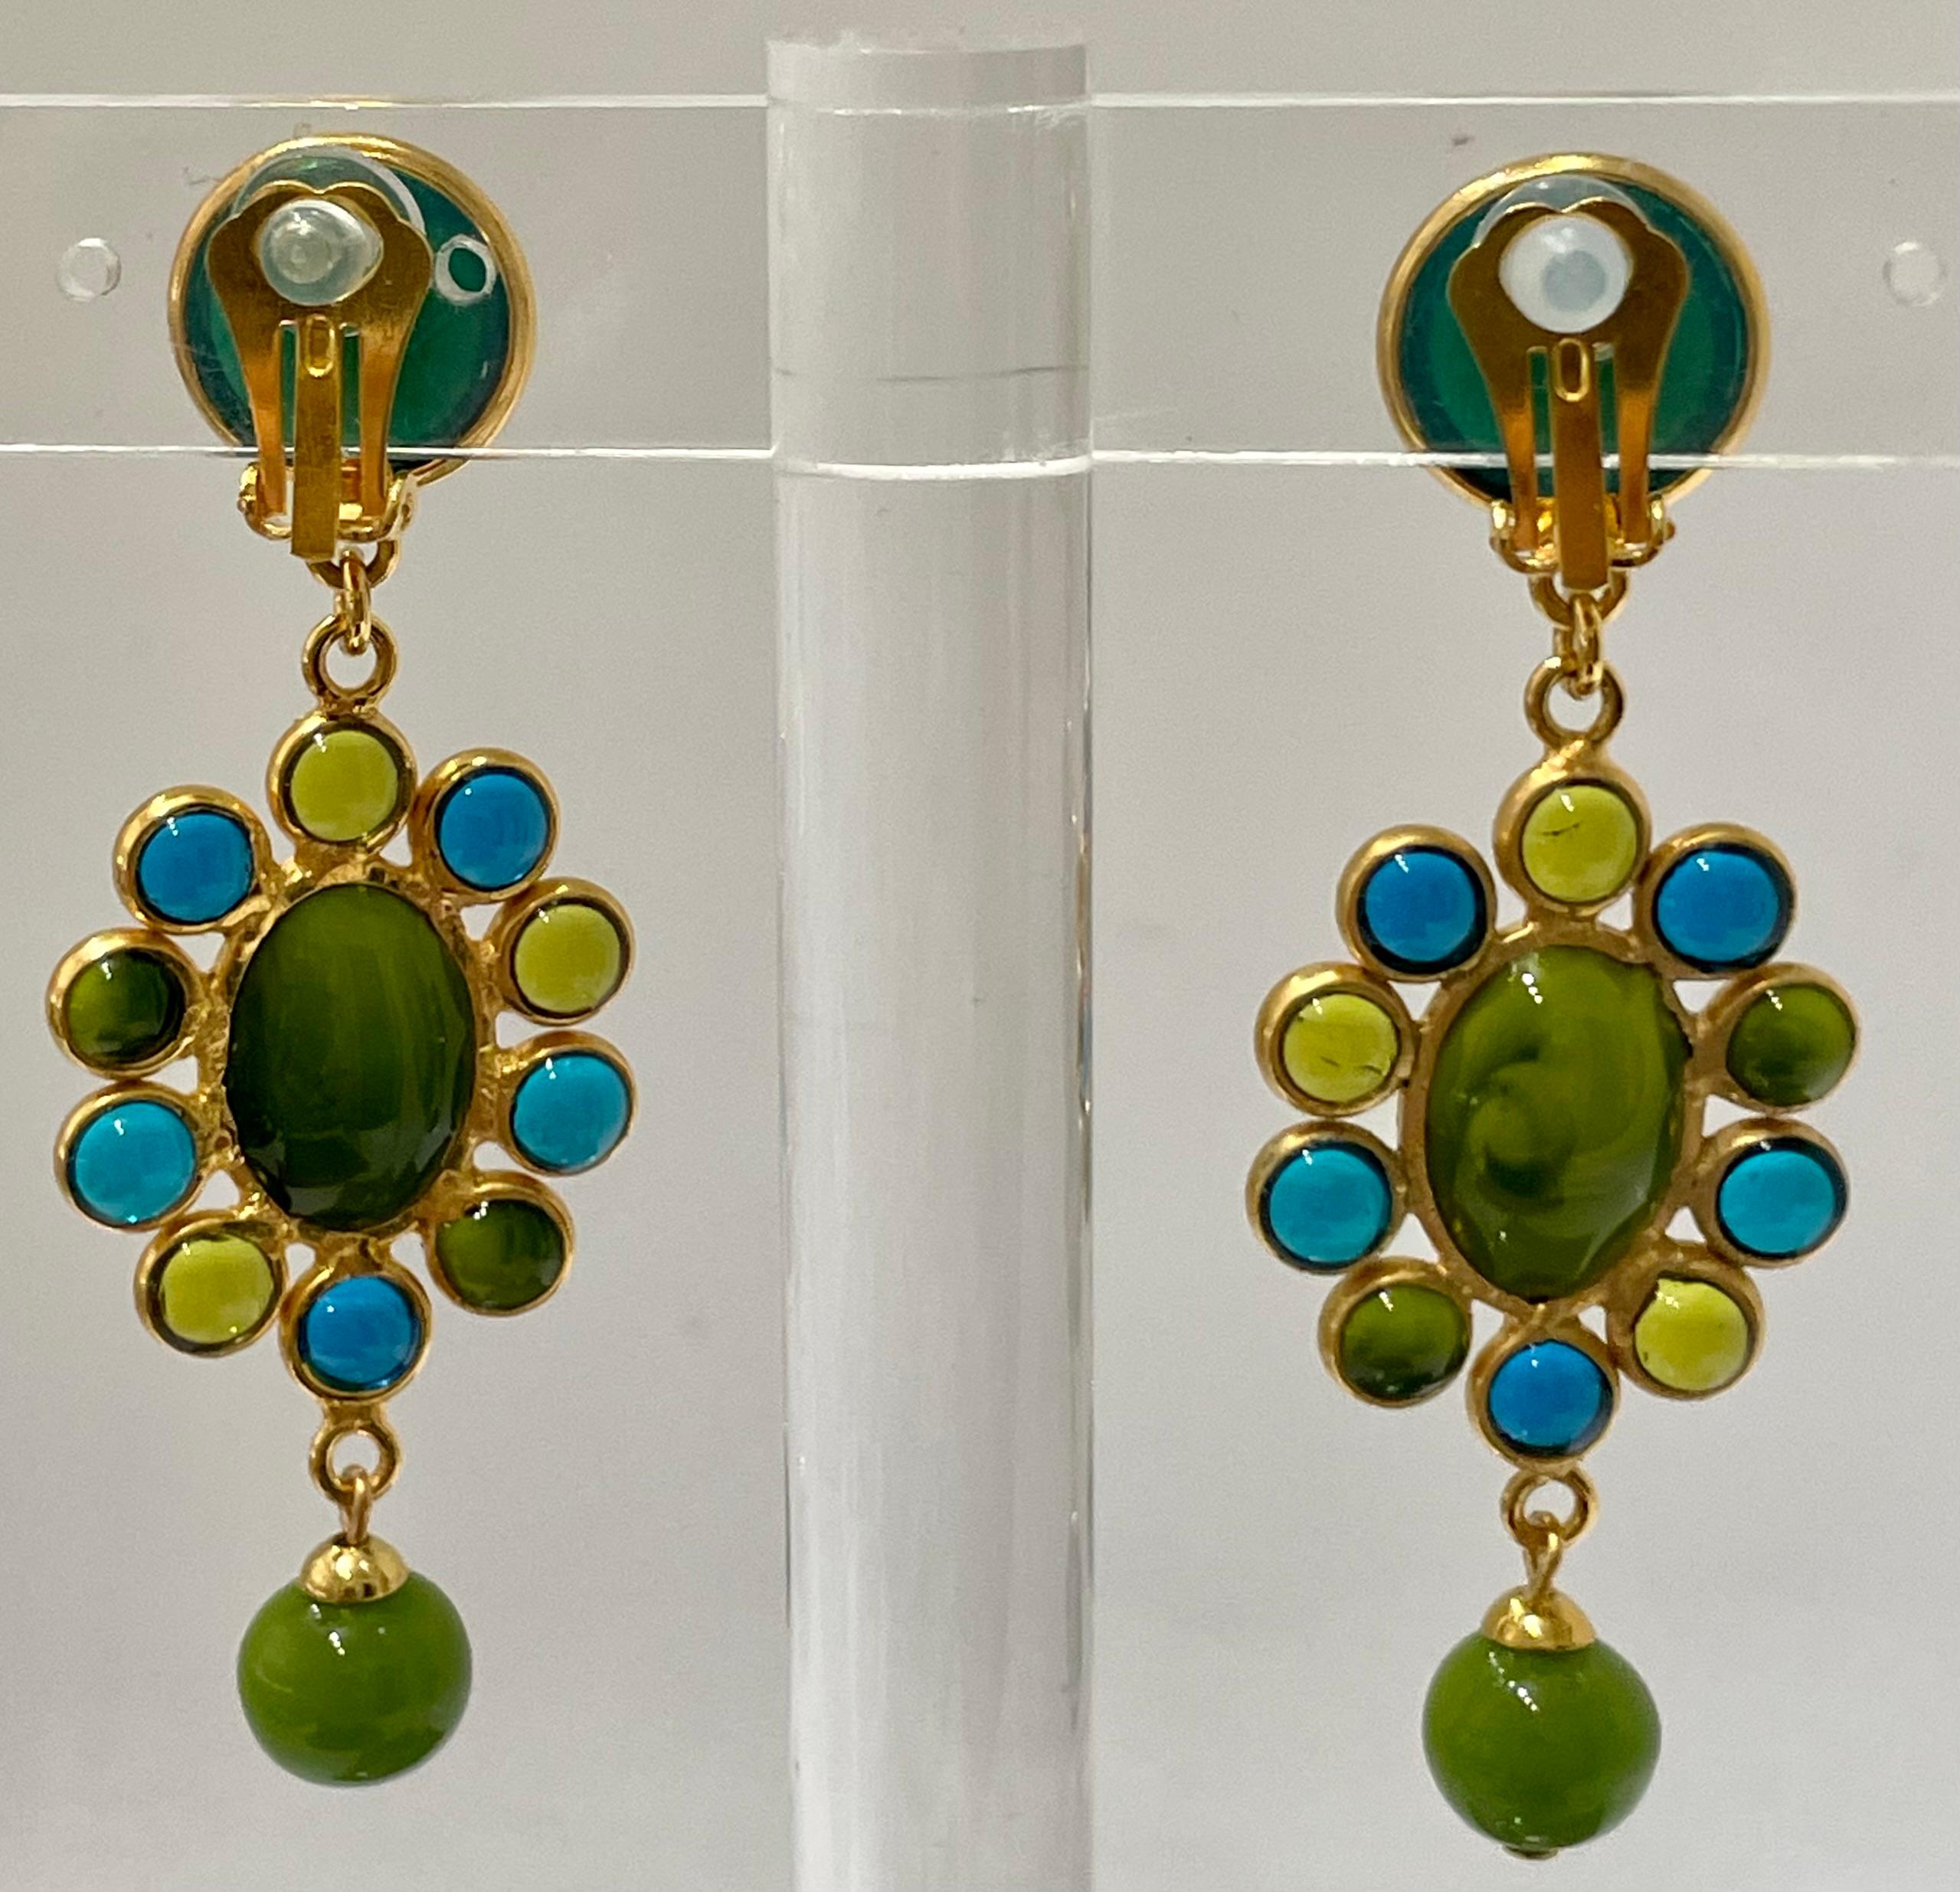 Designed by Françoise Montague.
The established business included a global clientele and boutique in Paris. After Montague took over, her most important clients were Nina Ricci and Franck & Fils. Early jewelry by Montague, according to Muller, “is